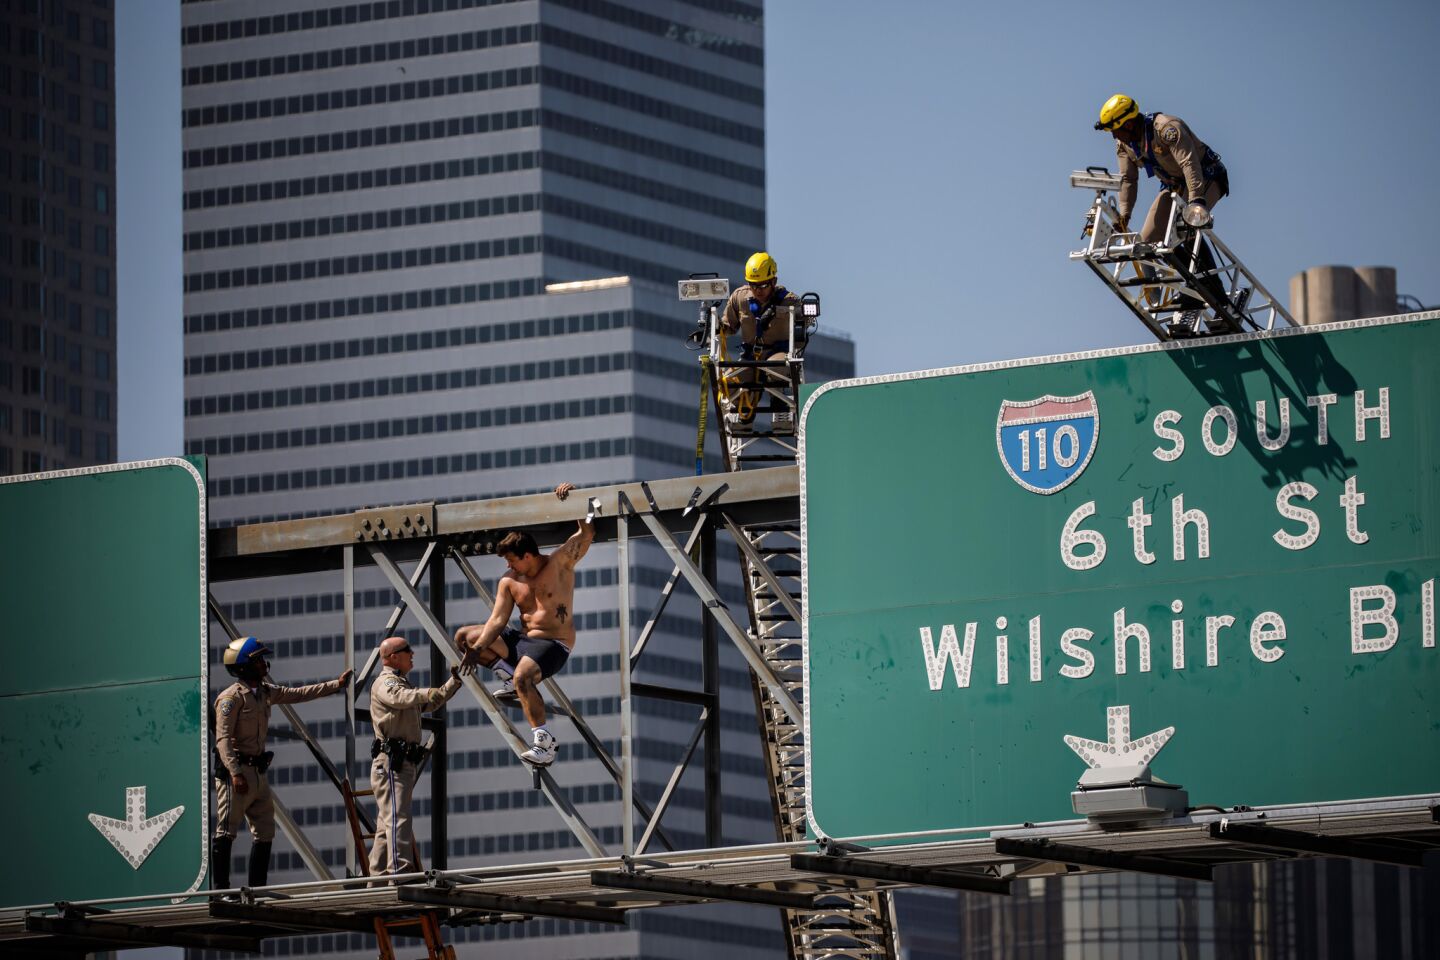 Firefighters and California Highway Patrol officers attempt to remove a shirtless man from a sign over the 110 Freeway in downtown Los Angeles.